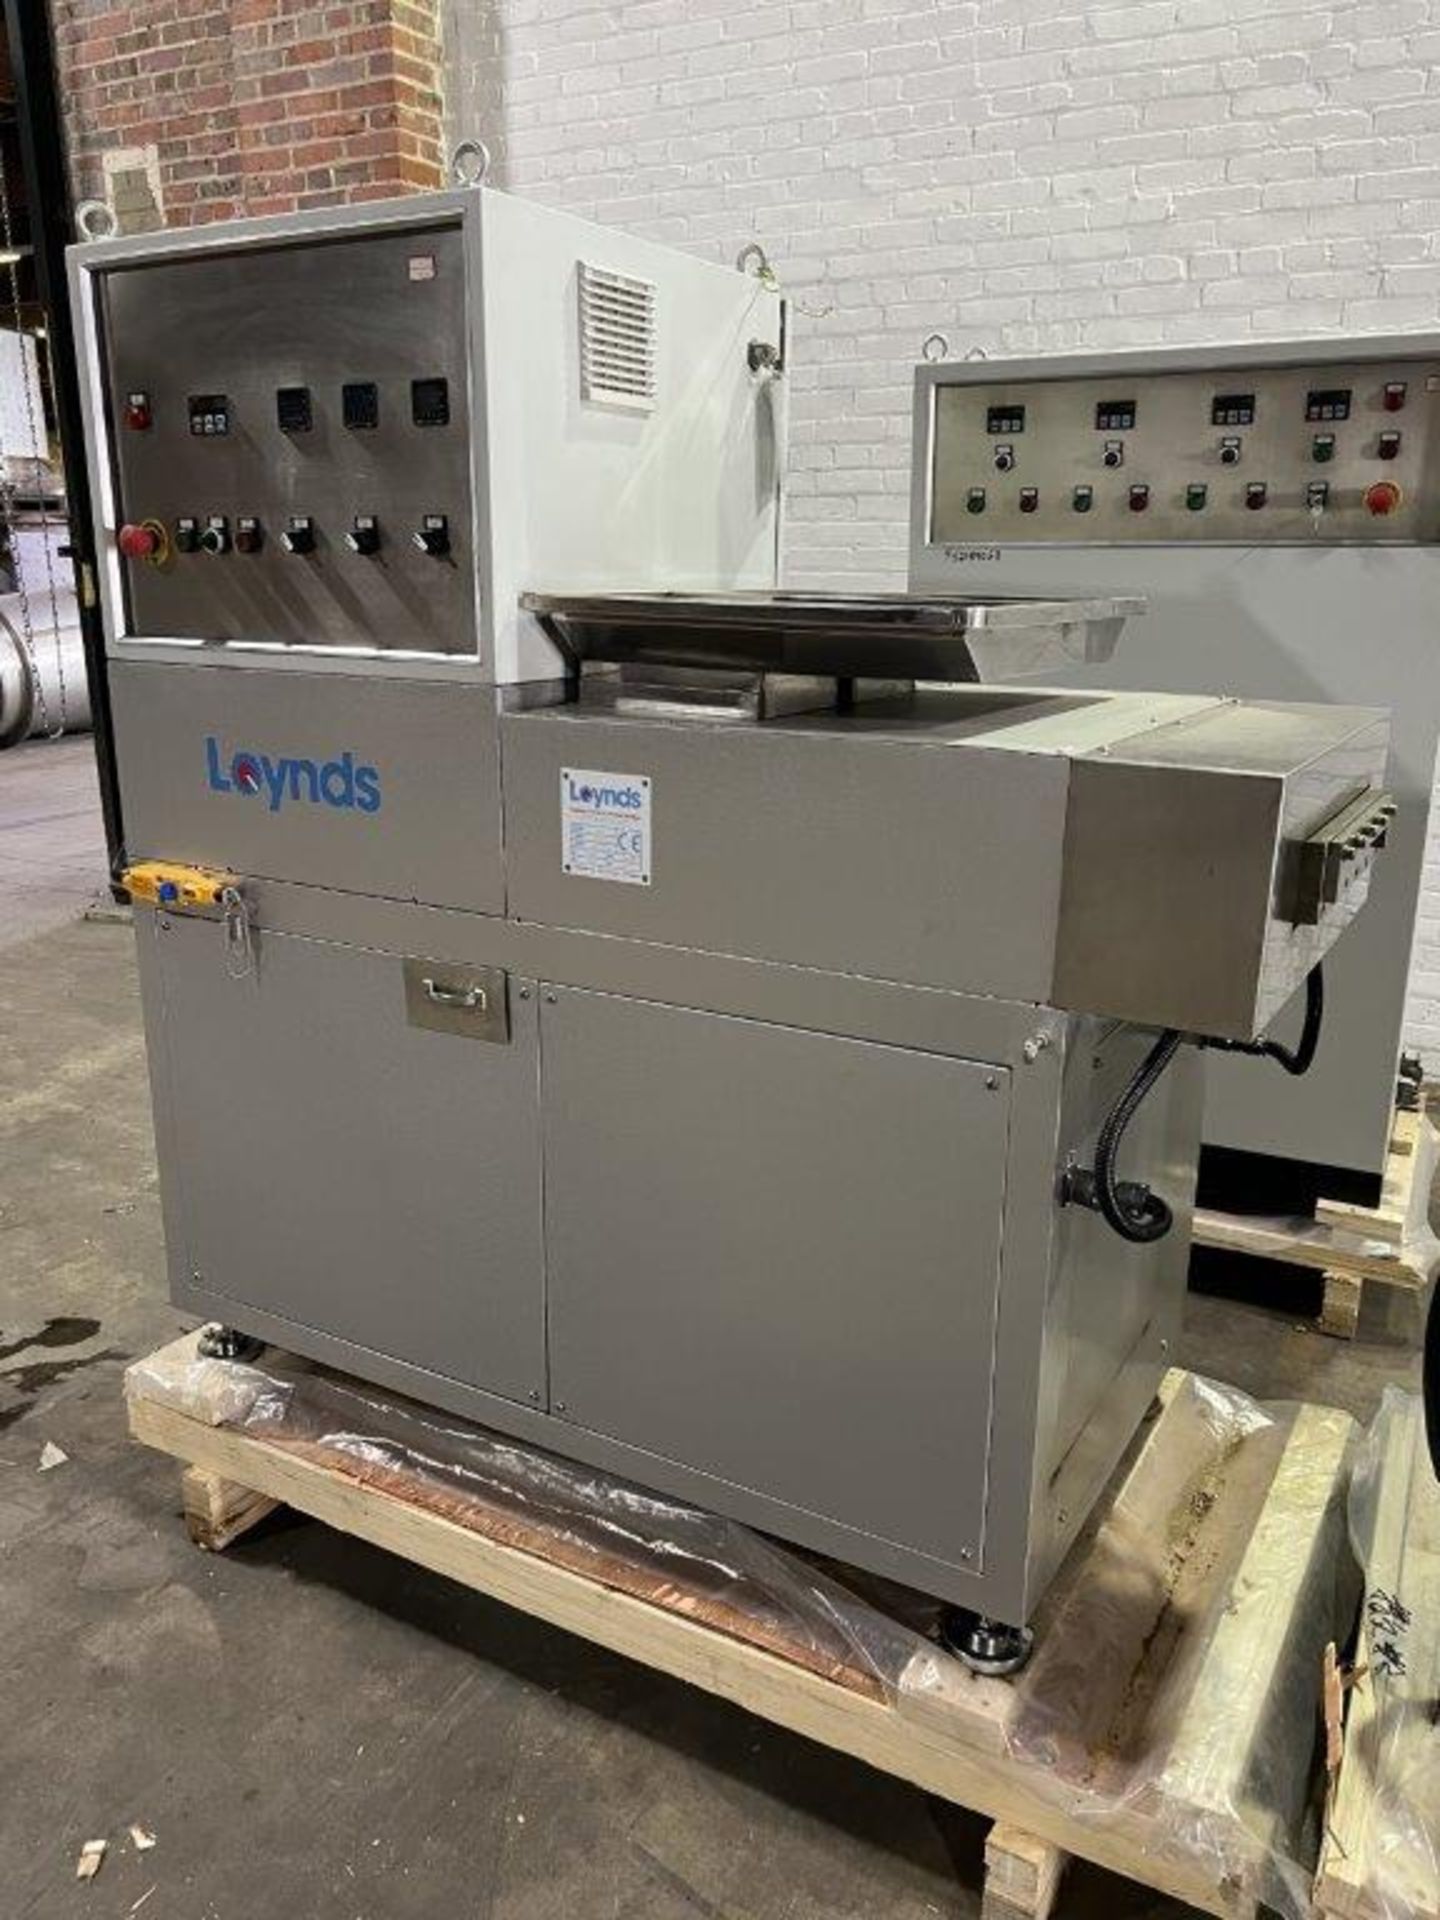 Loynds 300 mm Wide Rolling & Scoring Line for Chiclets - Image 78 of 85